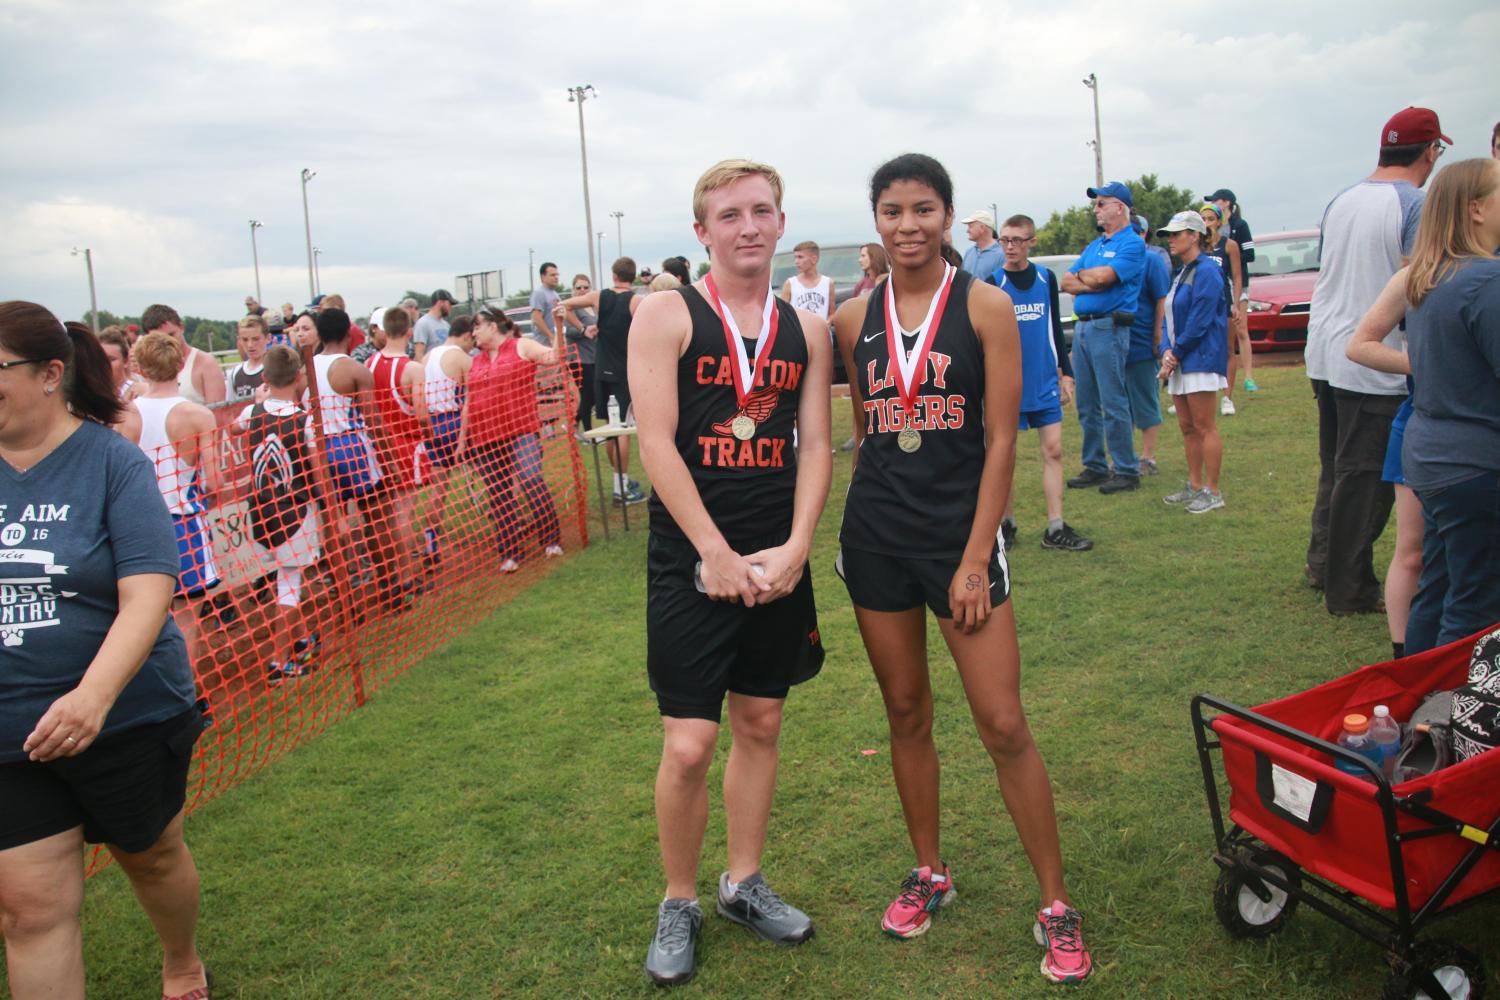 Medalists Cooper Evans and Lashayla Green